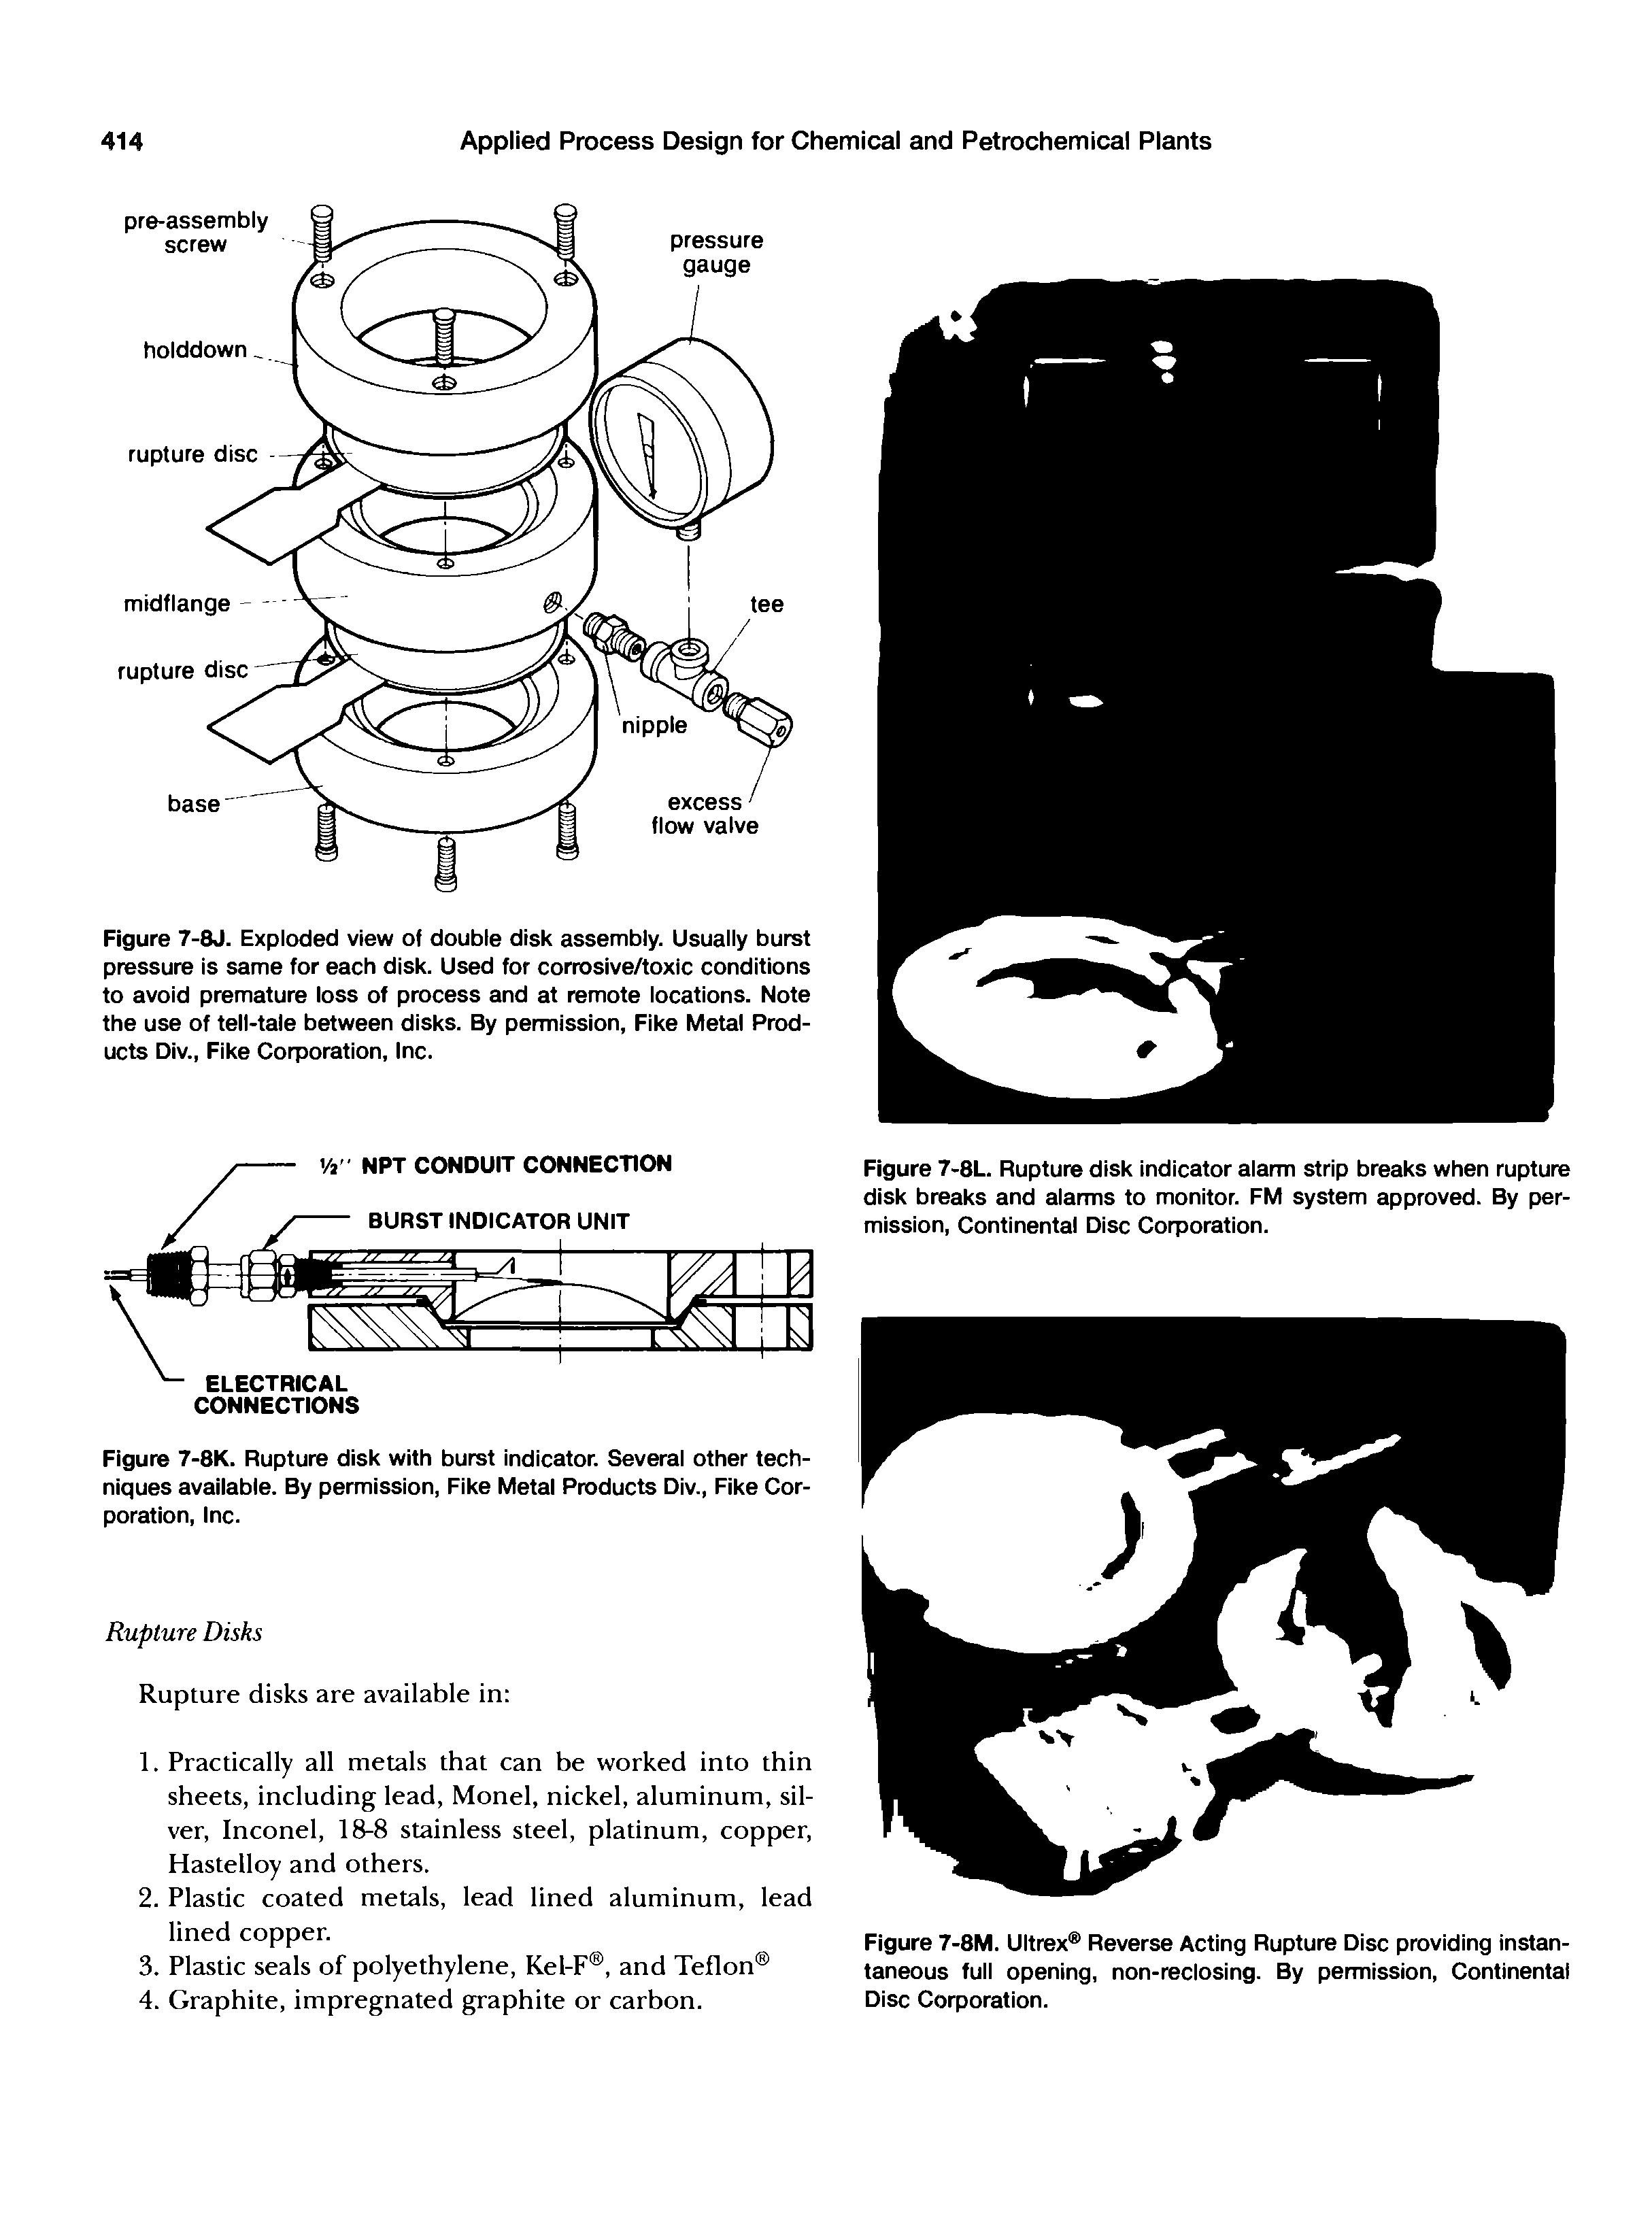 Figure 7-8J. Exploded view of double disk assembly. Usually burst pressure is same for each disk. Used for corrosive/toxic conditions to avoid premature loss of process and at remote locations. Note the use of tell-tale between disks. By permission, Fike Metal Products Div., Flke Corporation, Inc.